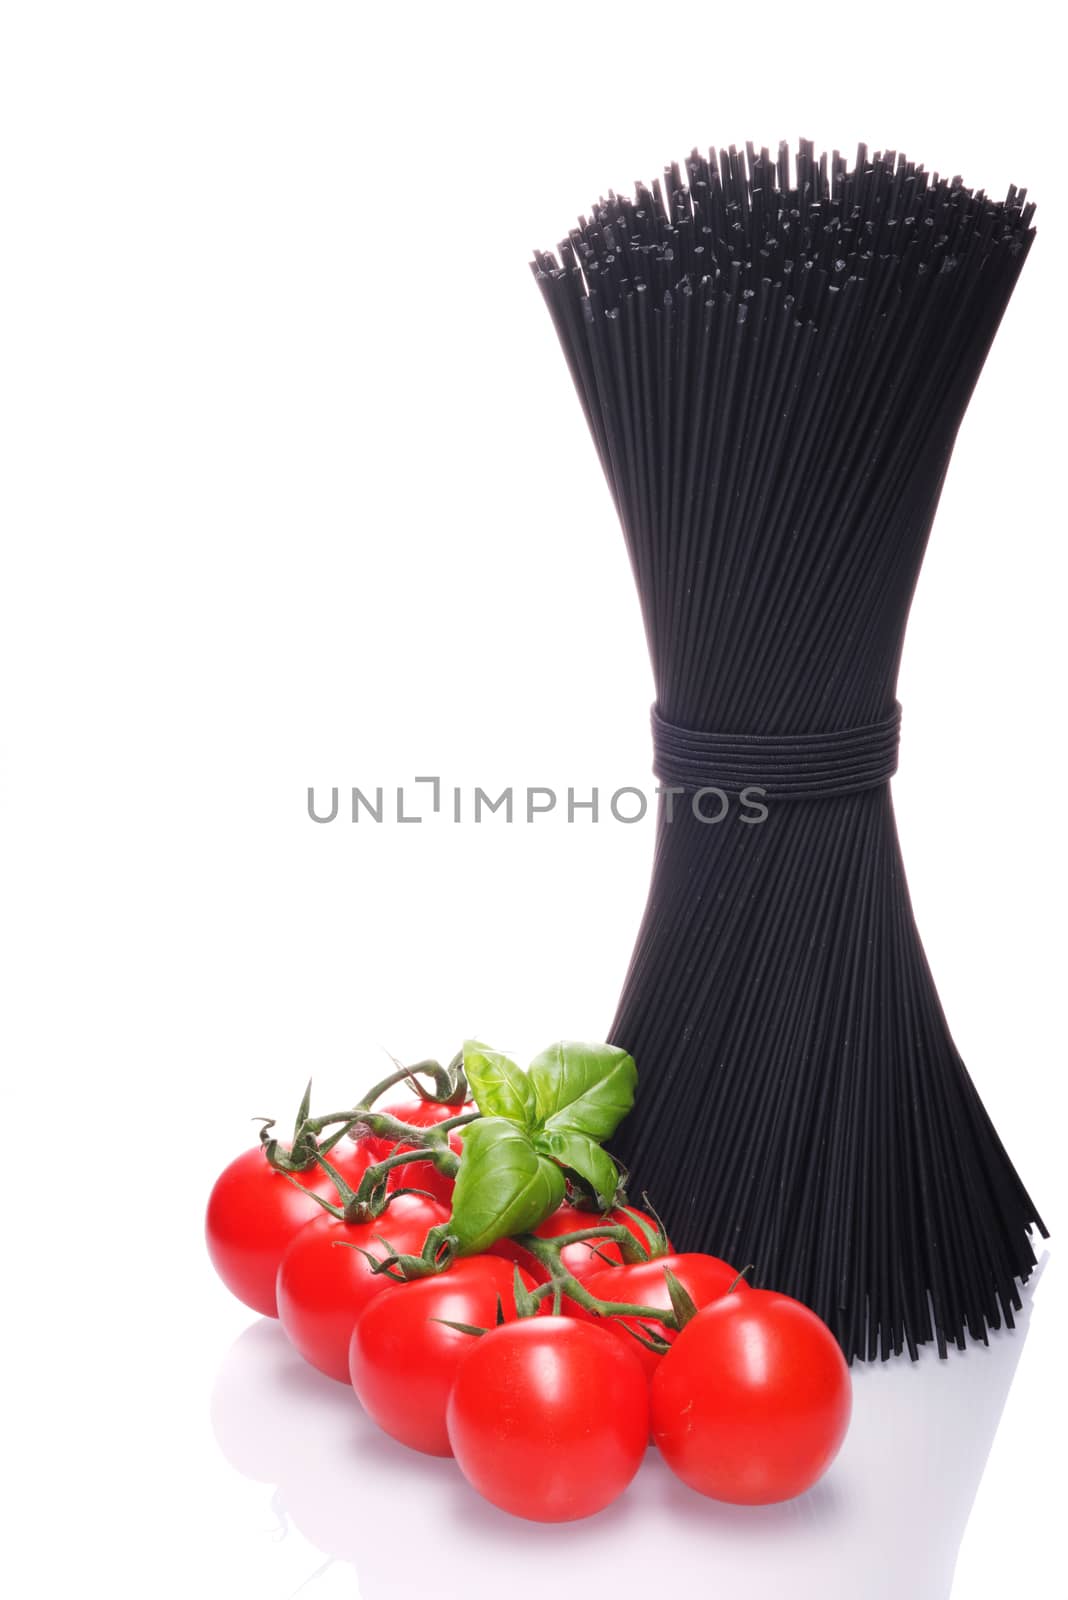 Black spaghetti with basel leaves and red tomato on white background by Fischeron